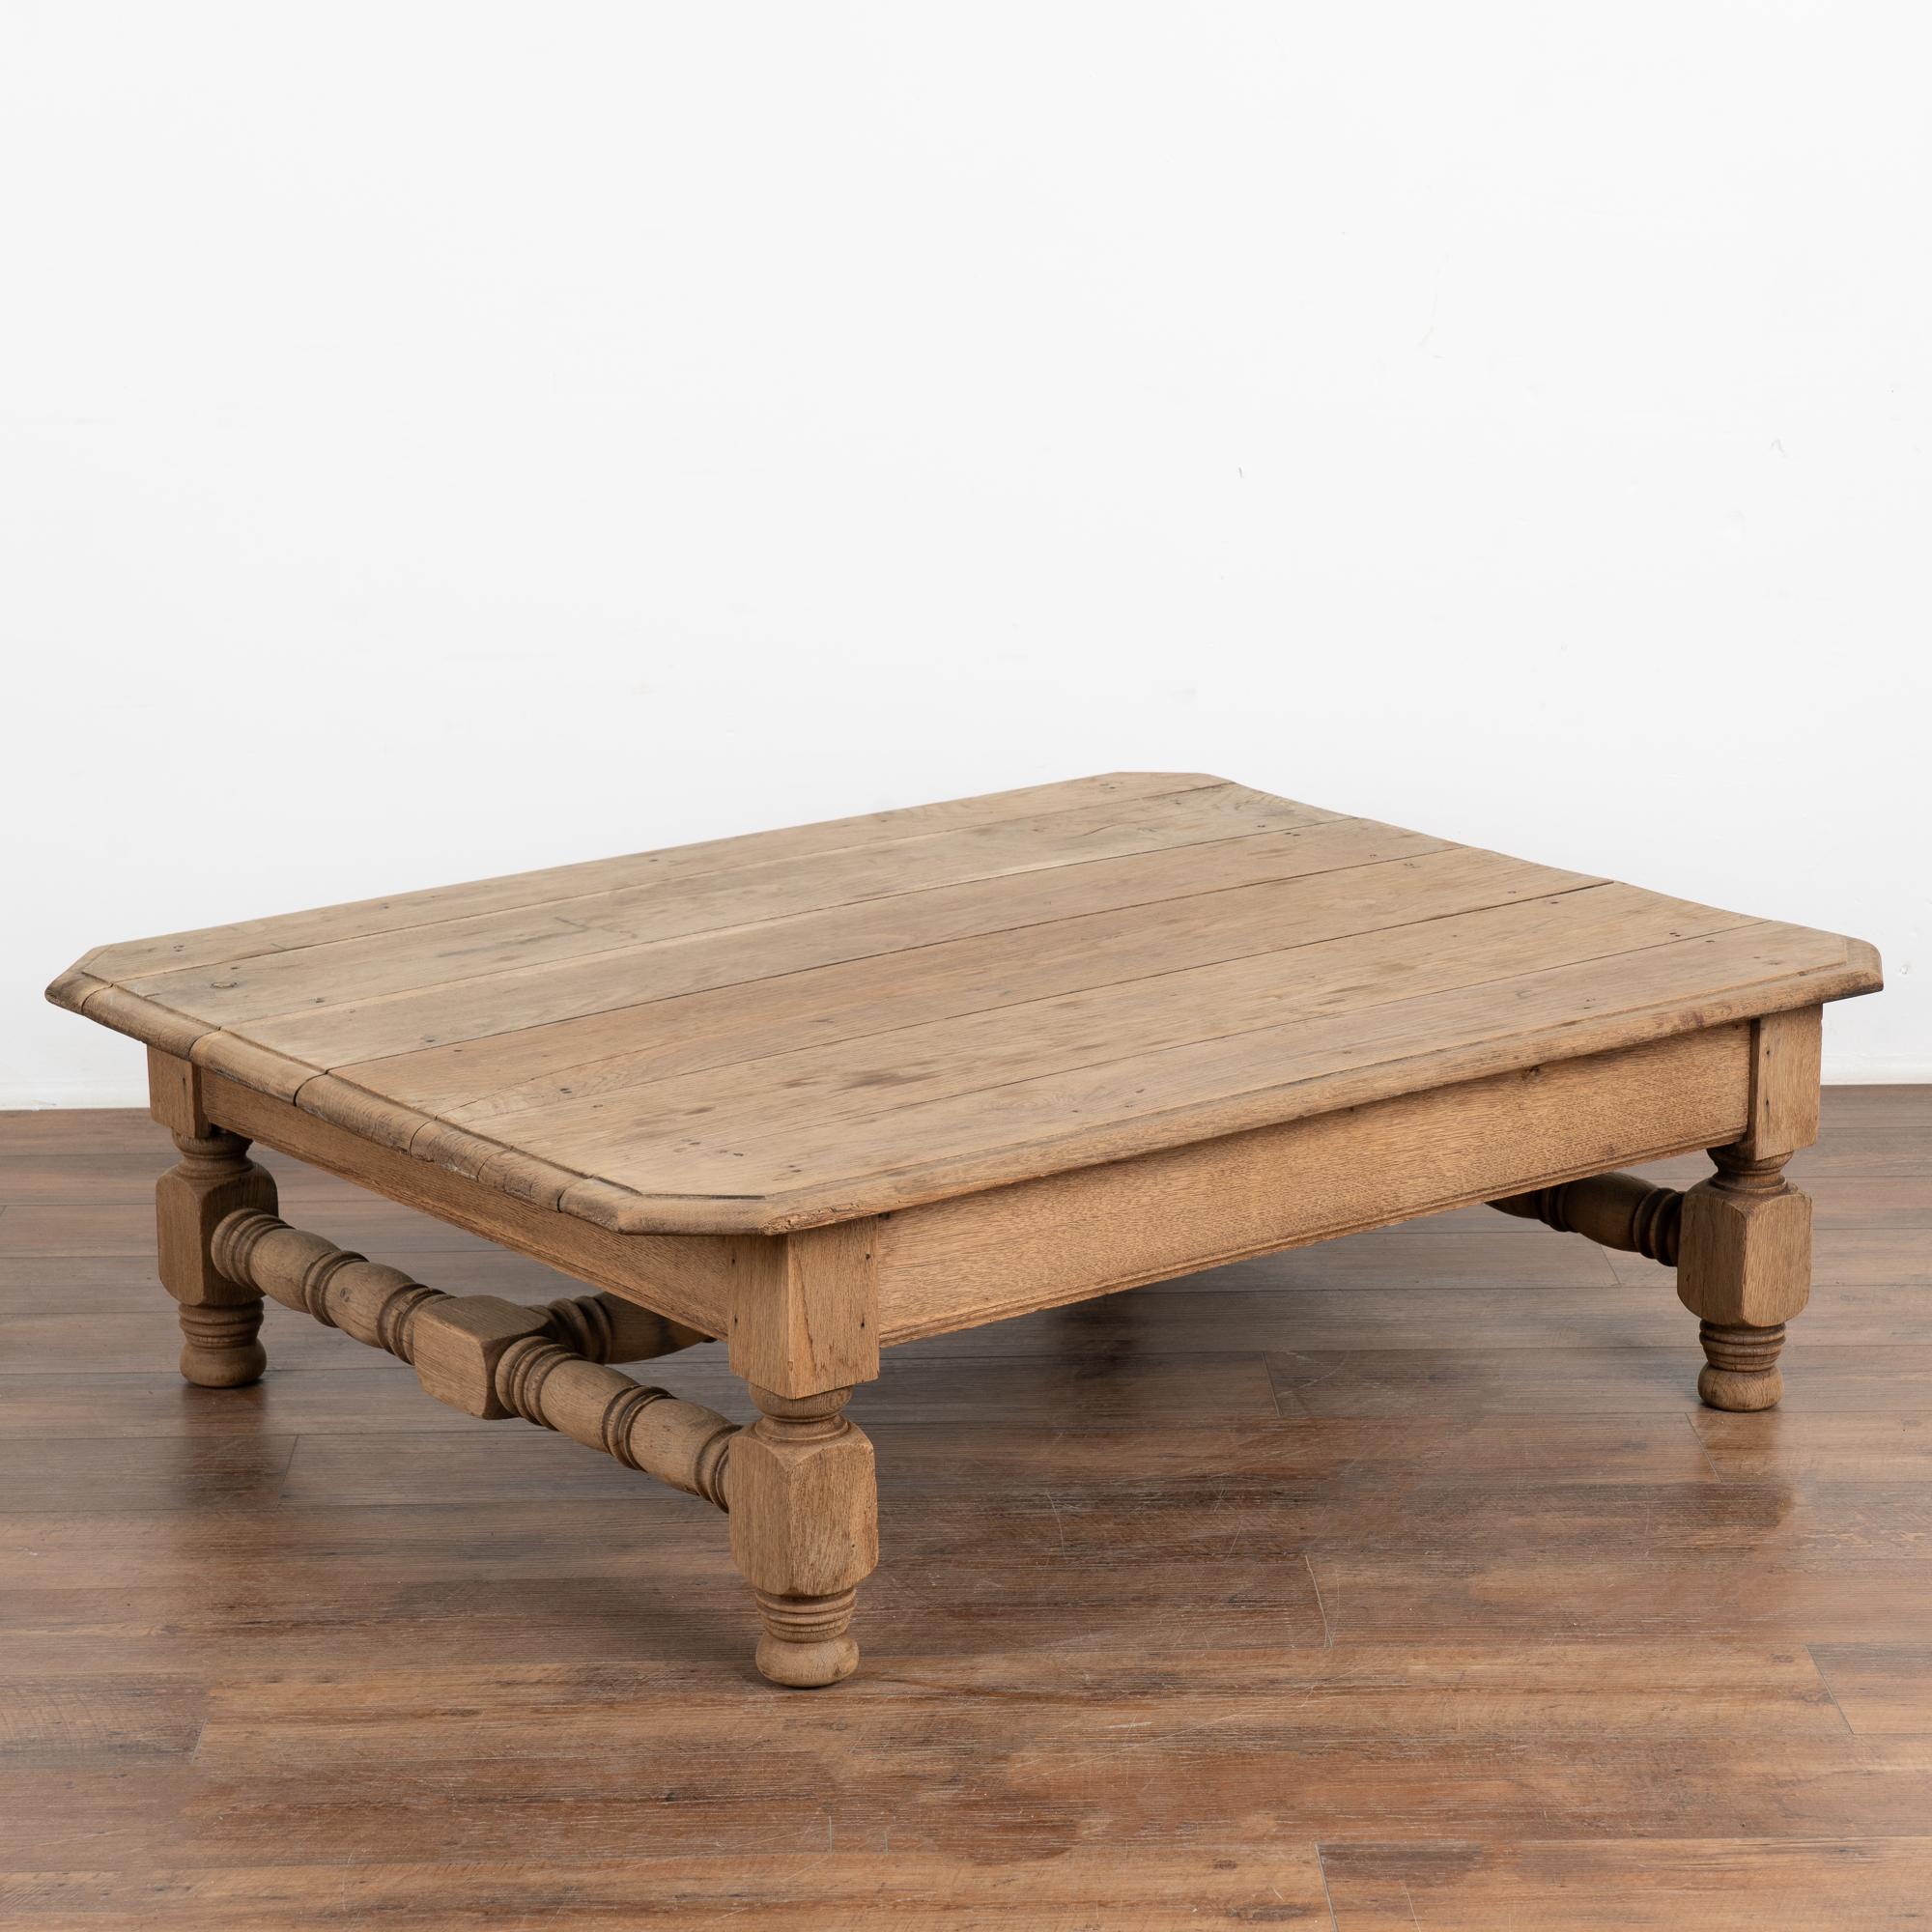 Bleached oak coffee table from France. The user-friendly shape makes it highly functional while the organic feel of the bleached oak creates a fresh look for today's modern home. 
The handsome turned stretcher base creates an attractive contrast to